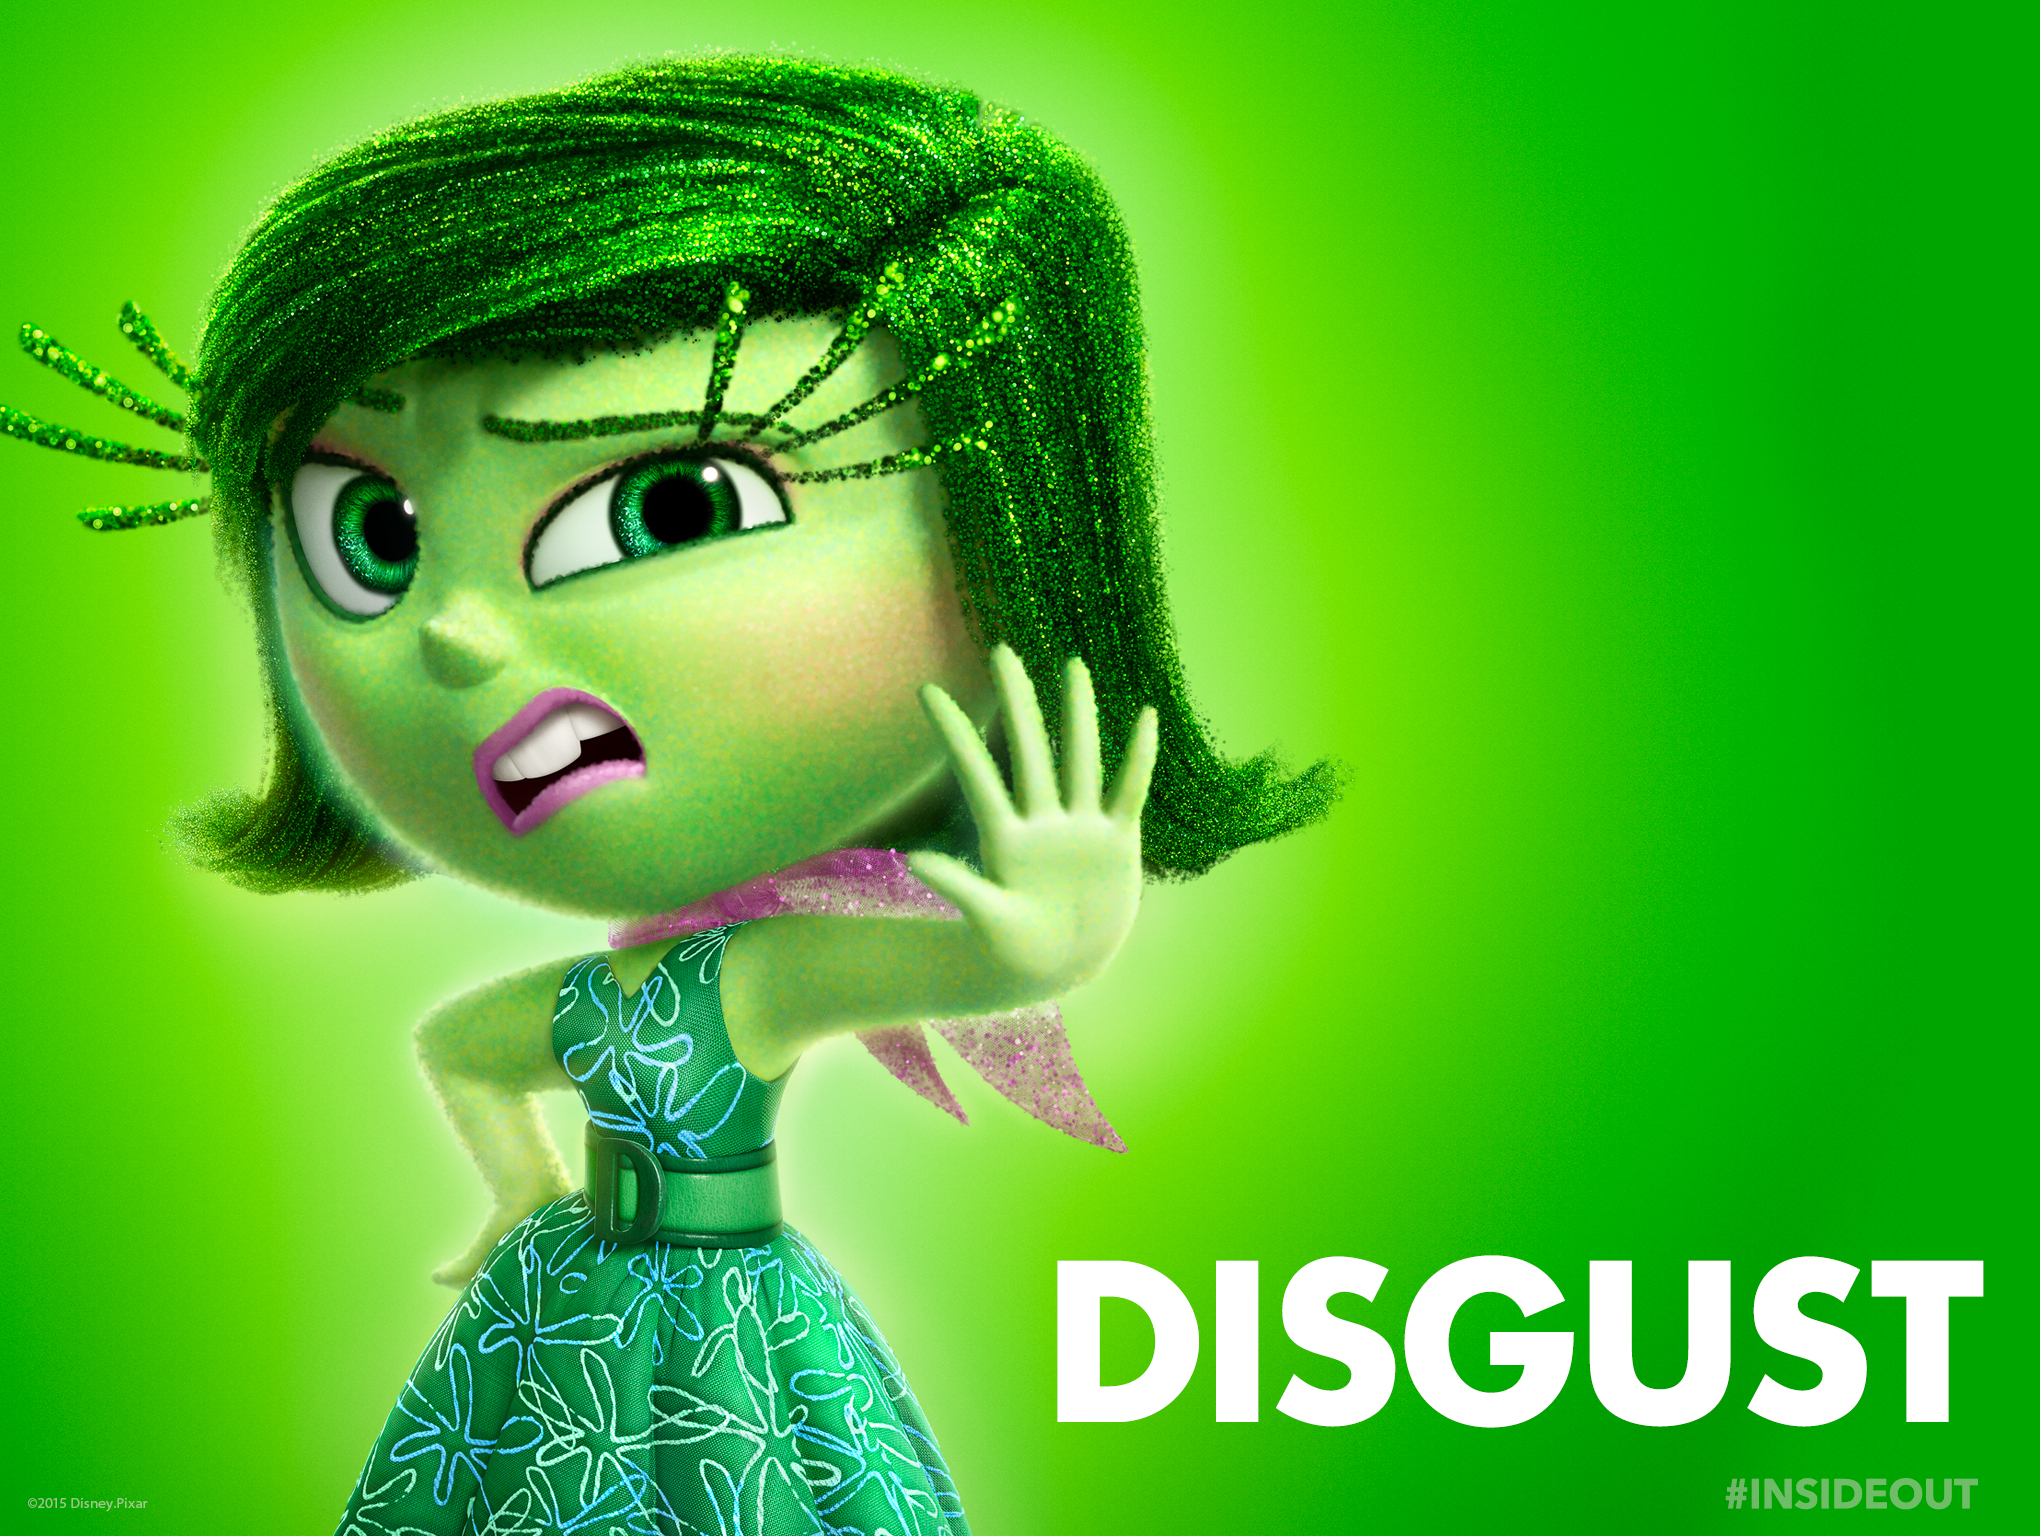 Disgust Wallpaper Inside Out